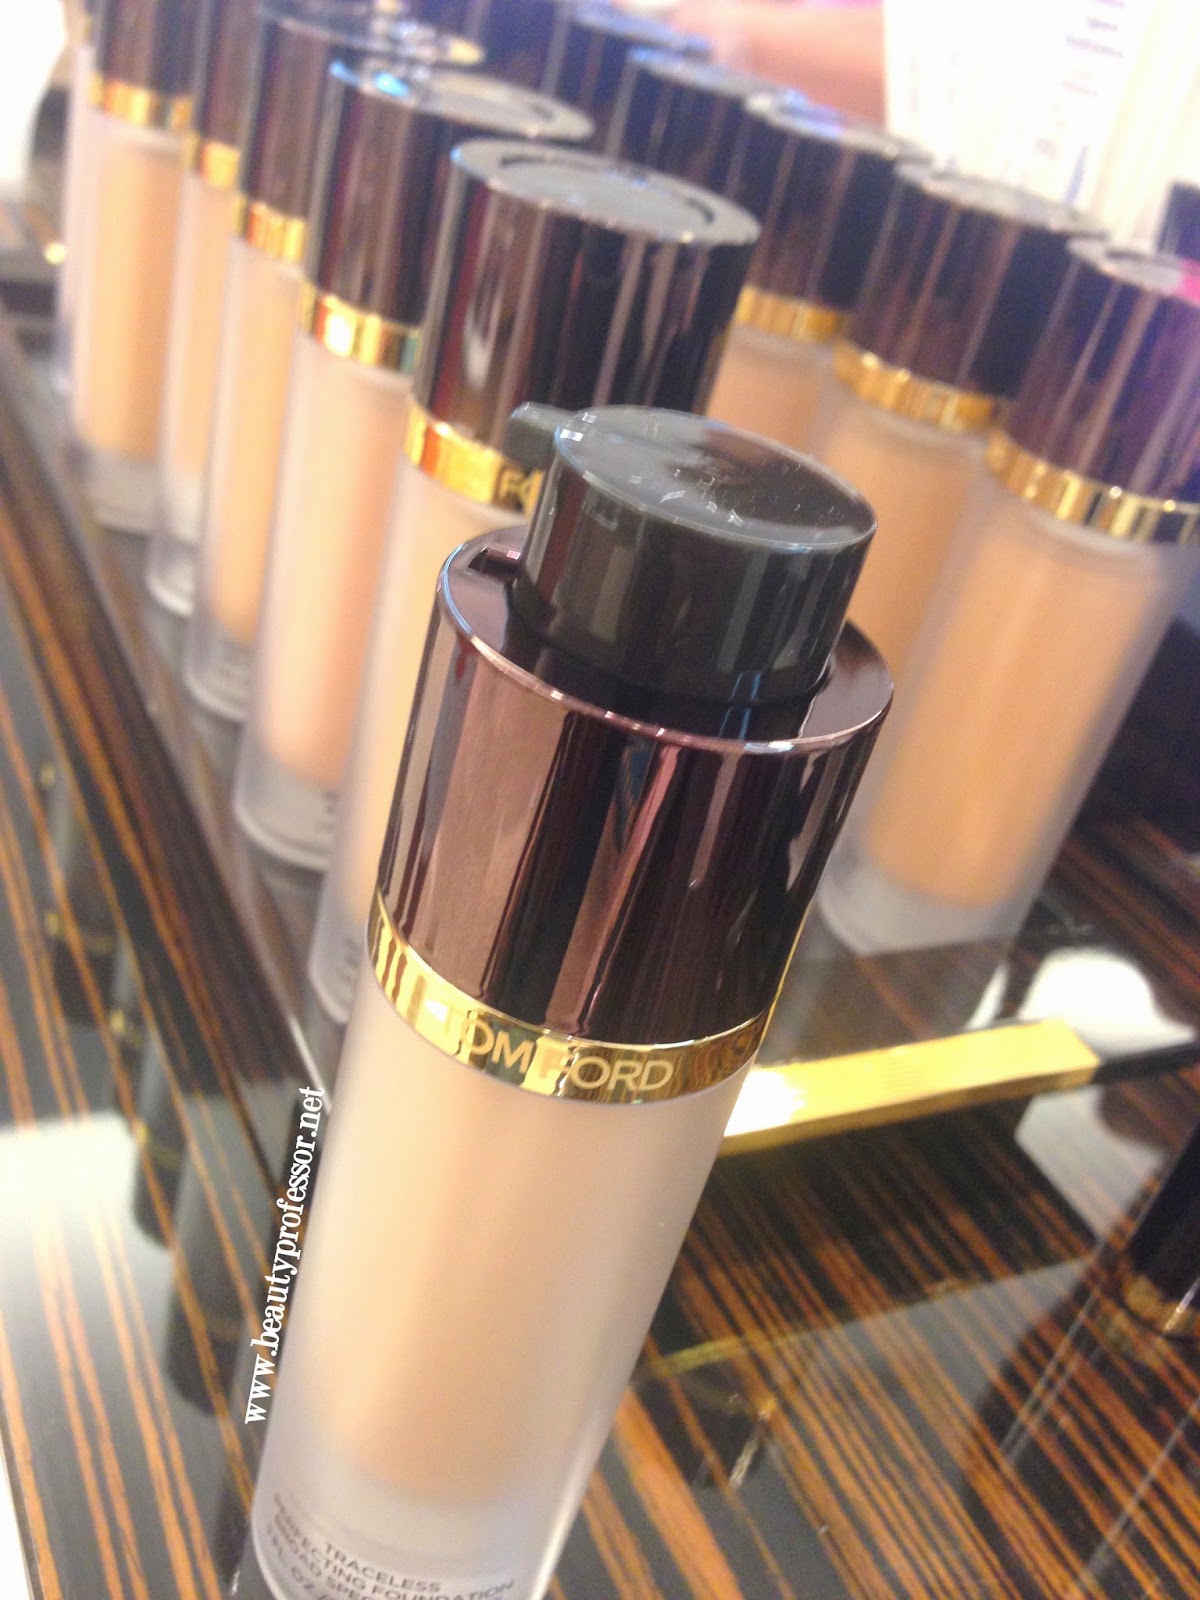 Tom Ford - Foundation...Swatches Beauty Perfecting Professor Traceless Shades! All of 15